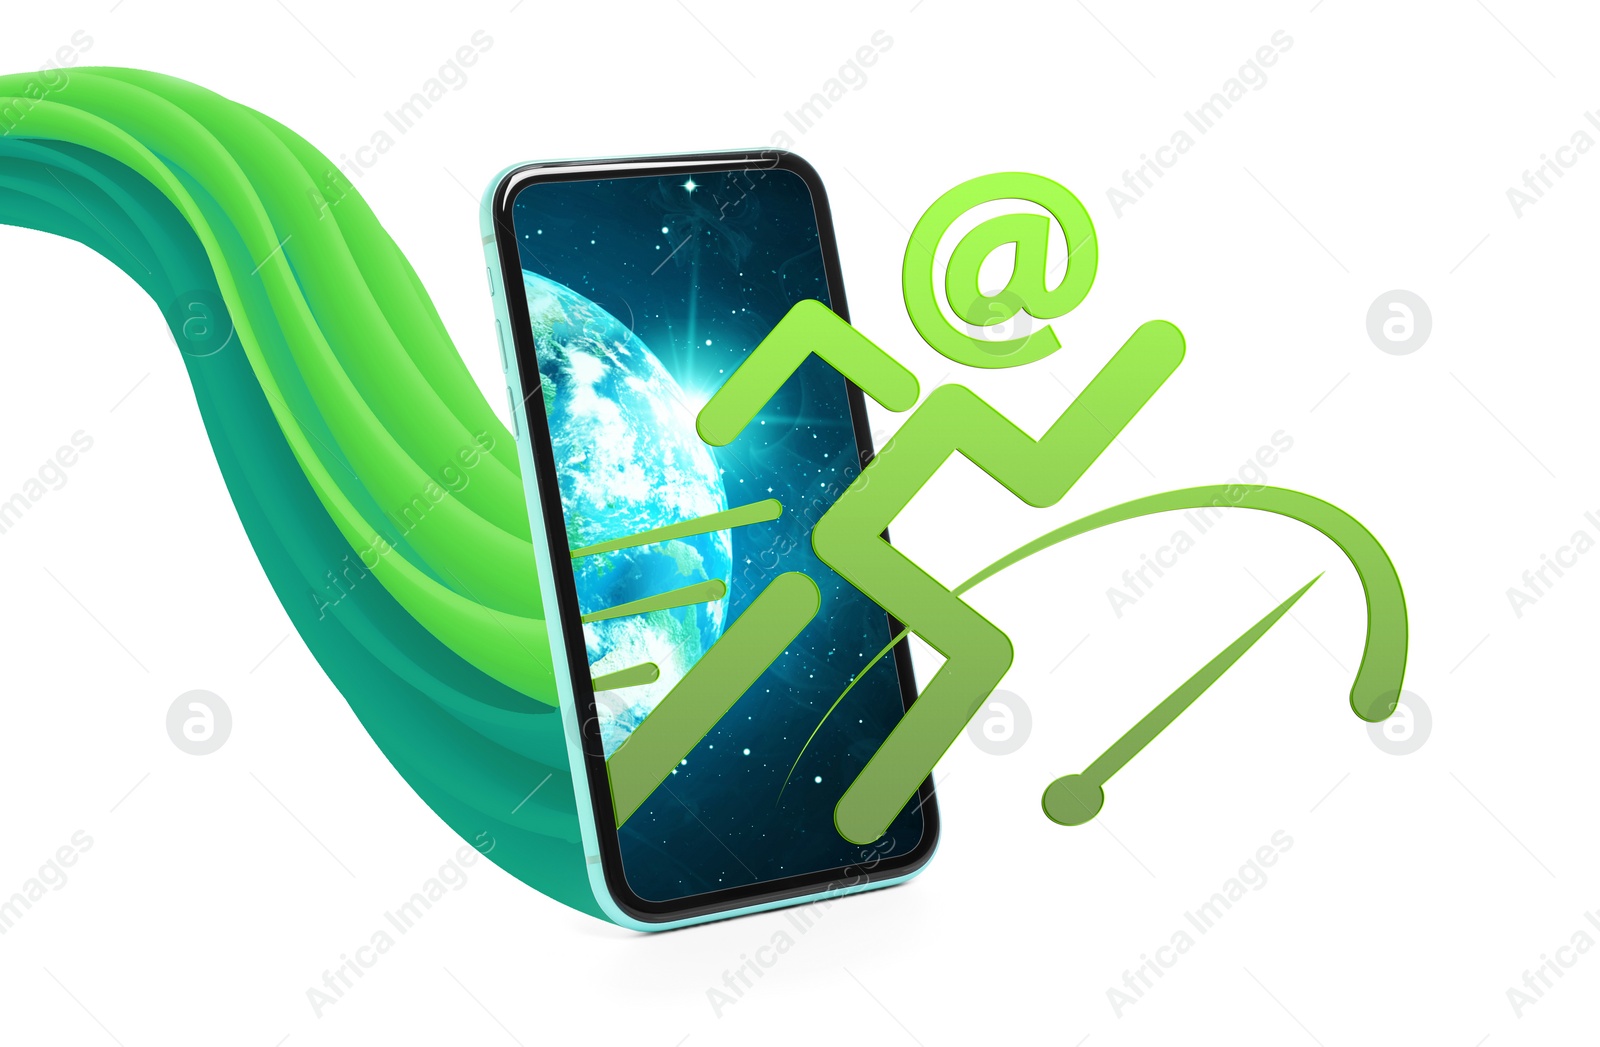 Image of Fast internet connection. Human figure with email address symbol head running out of smartphone on white background